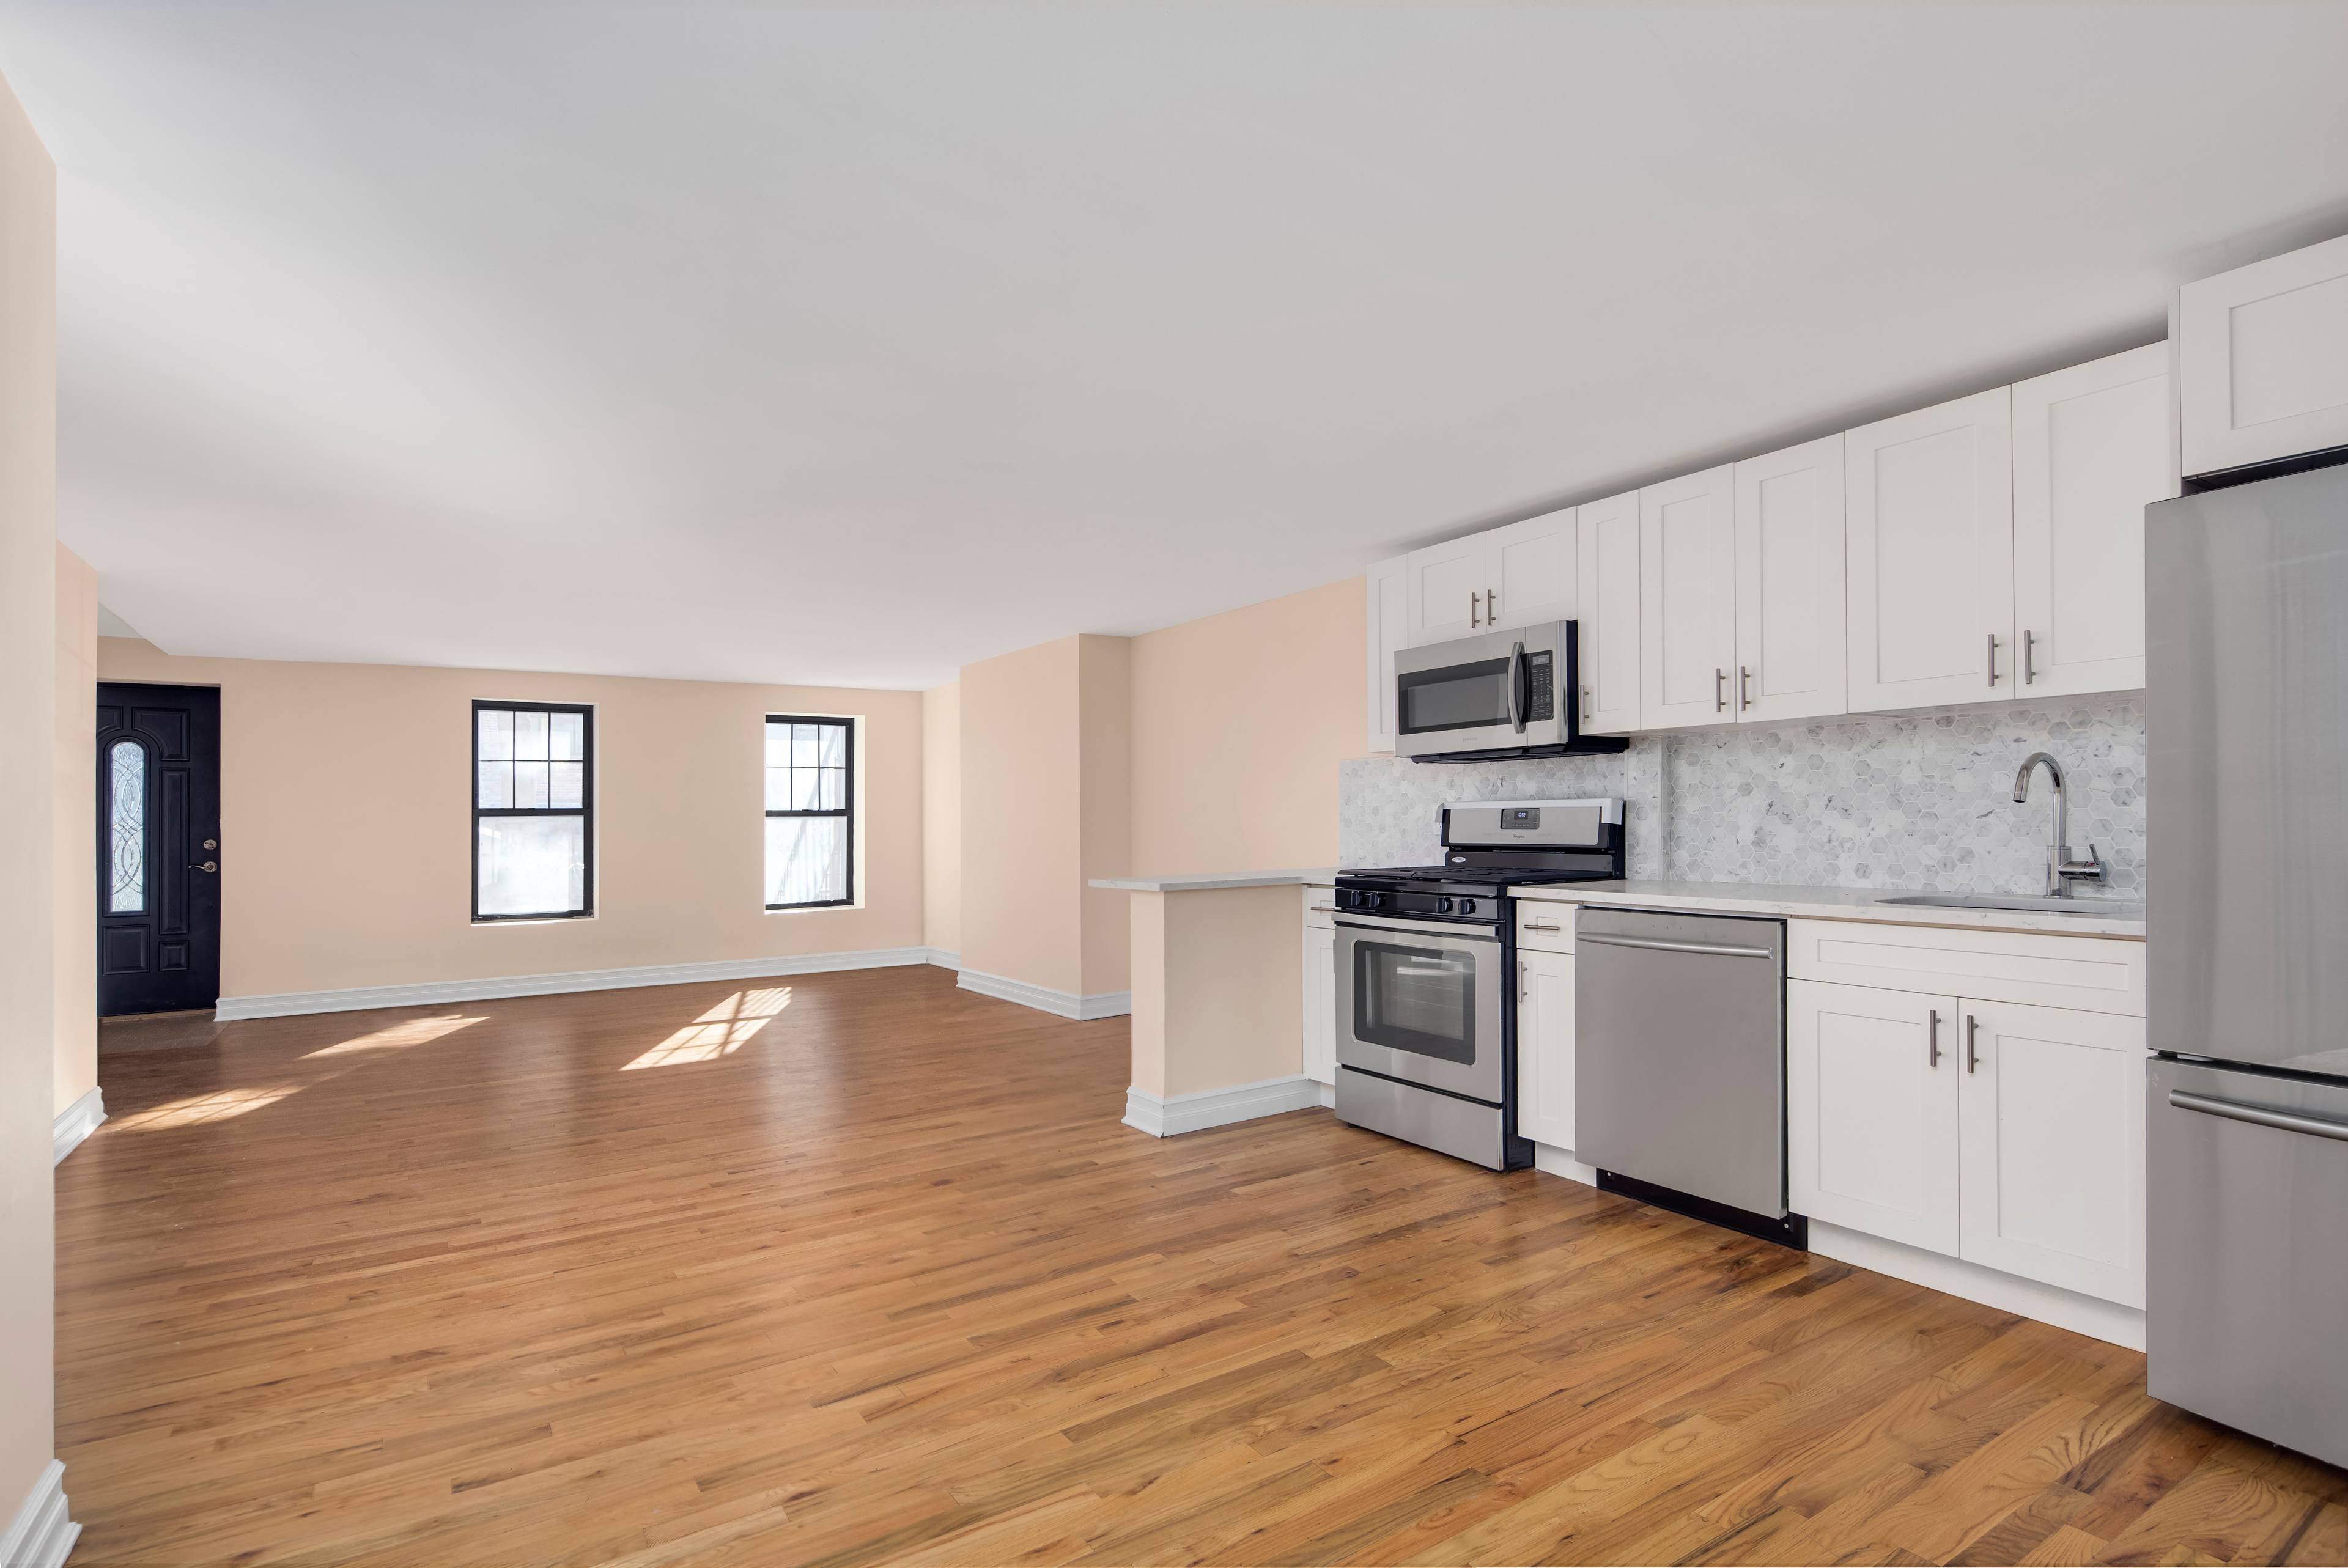 Enormous, spacious and fully renovated 2 bedroom, 2 bathroom rec room apartment that offers amazing natural sunlight through its large windows.